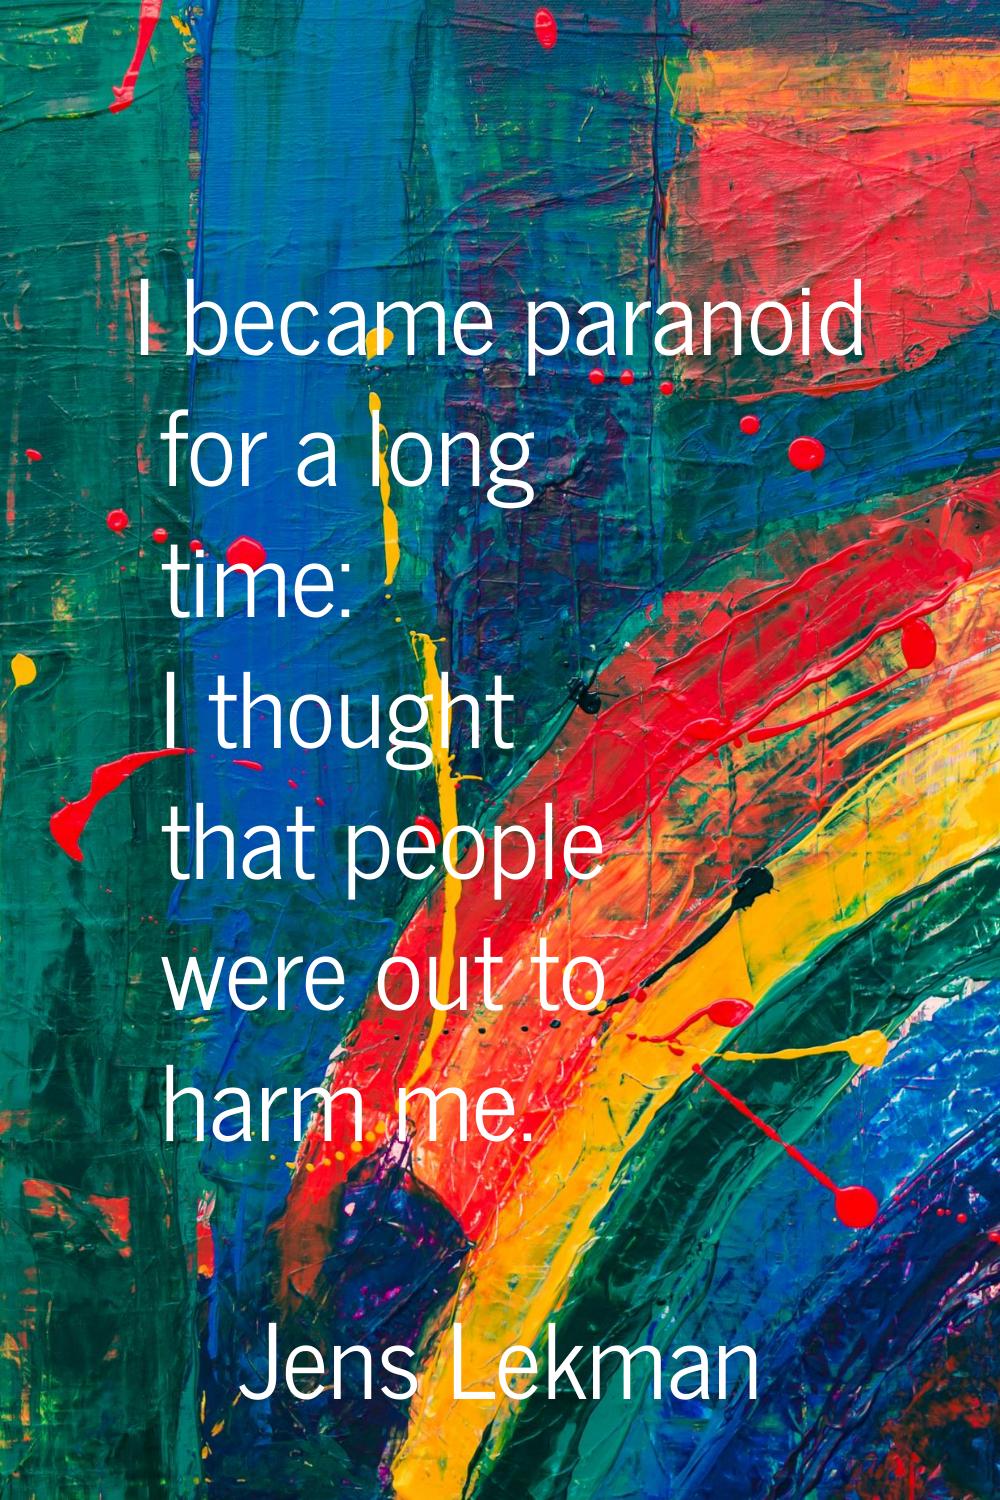 I became paranoid for a long time: I thought that people were out to harm me.